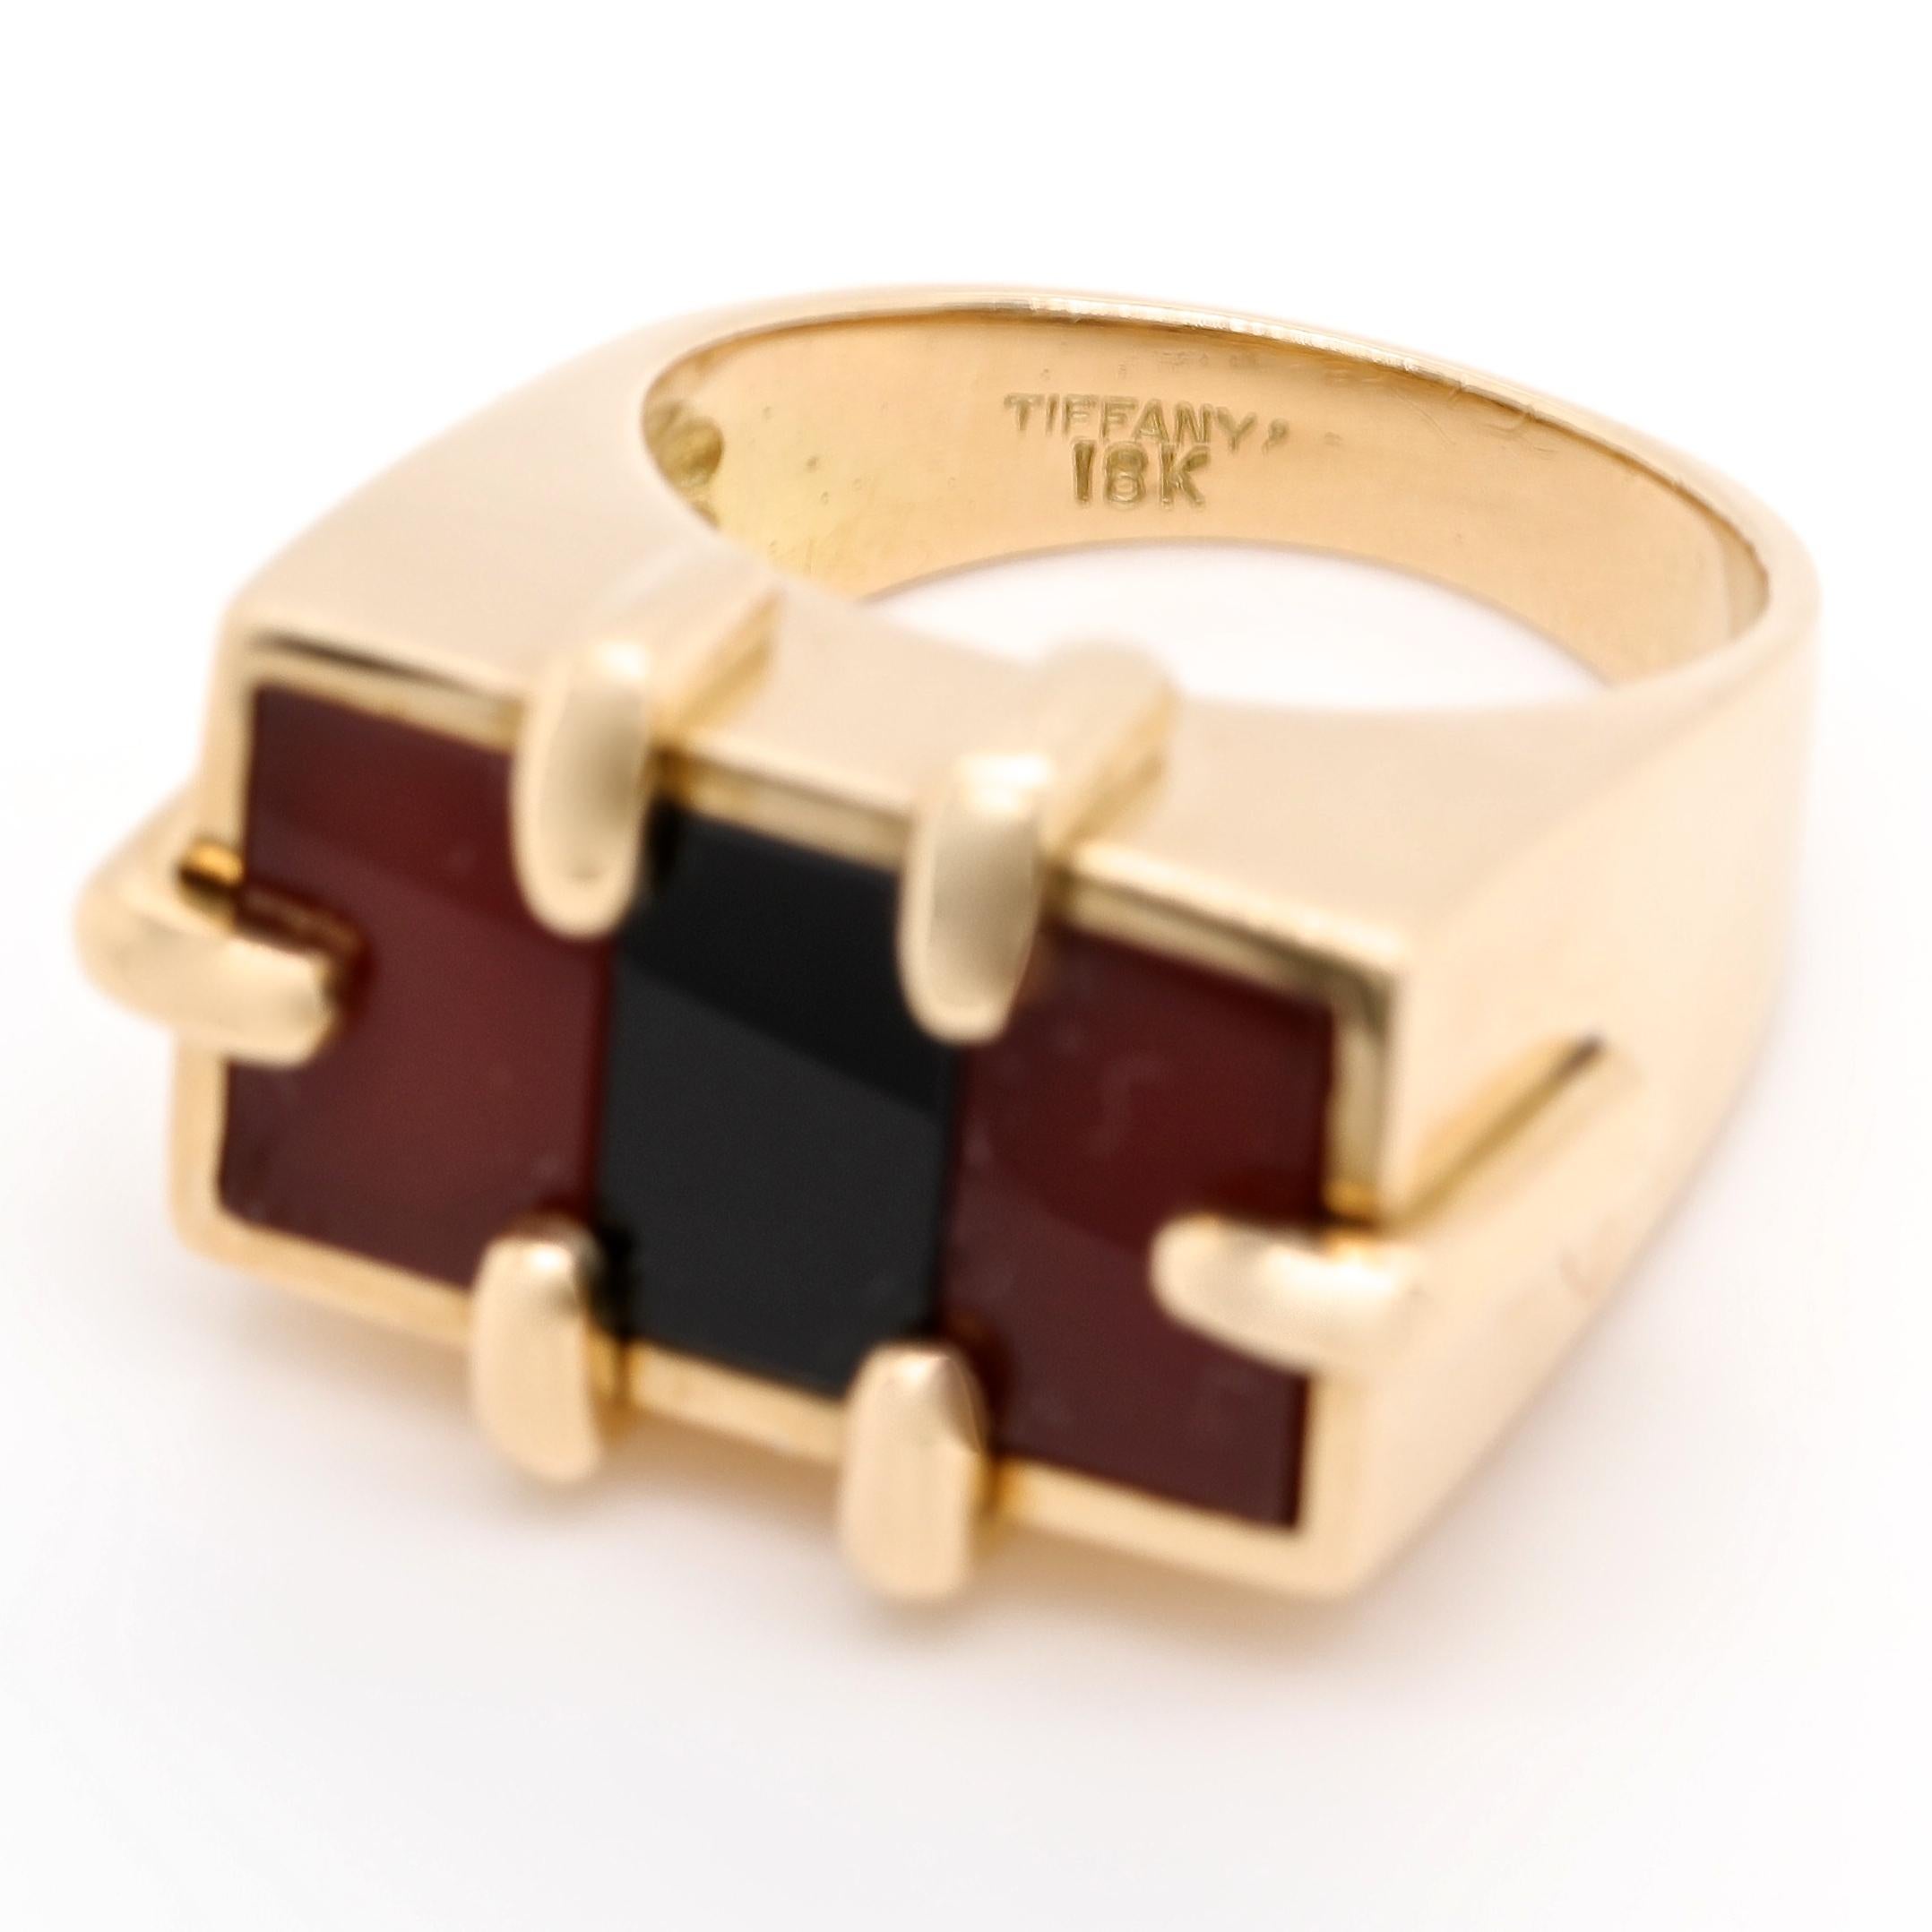 Substantial yellow gold statement rings are a very desirable and popular look right now. Get the look that everyone is on the hunt for. This is a Retro Tiffany & Co. Carnelian Onyx 18k Gold Ring. Signed Tiffany, 18k. Circa 1960's. 

Flawless